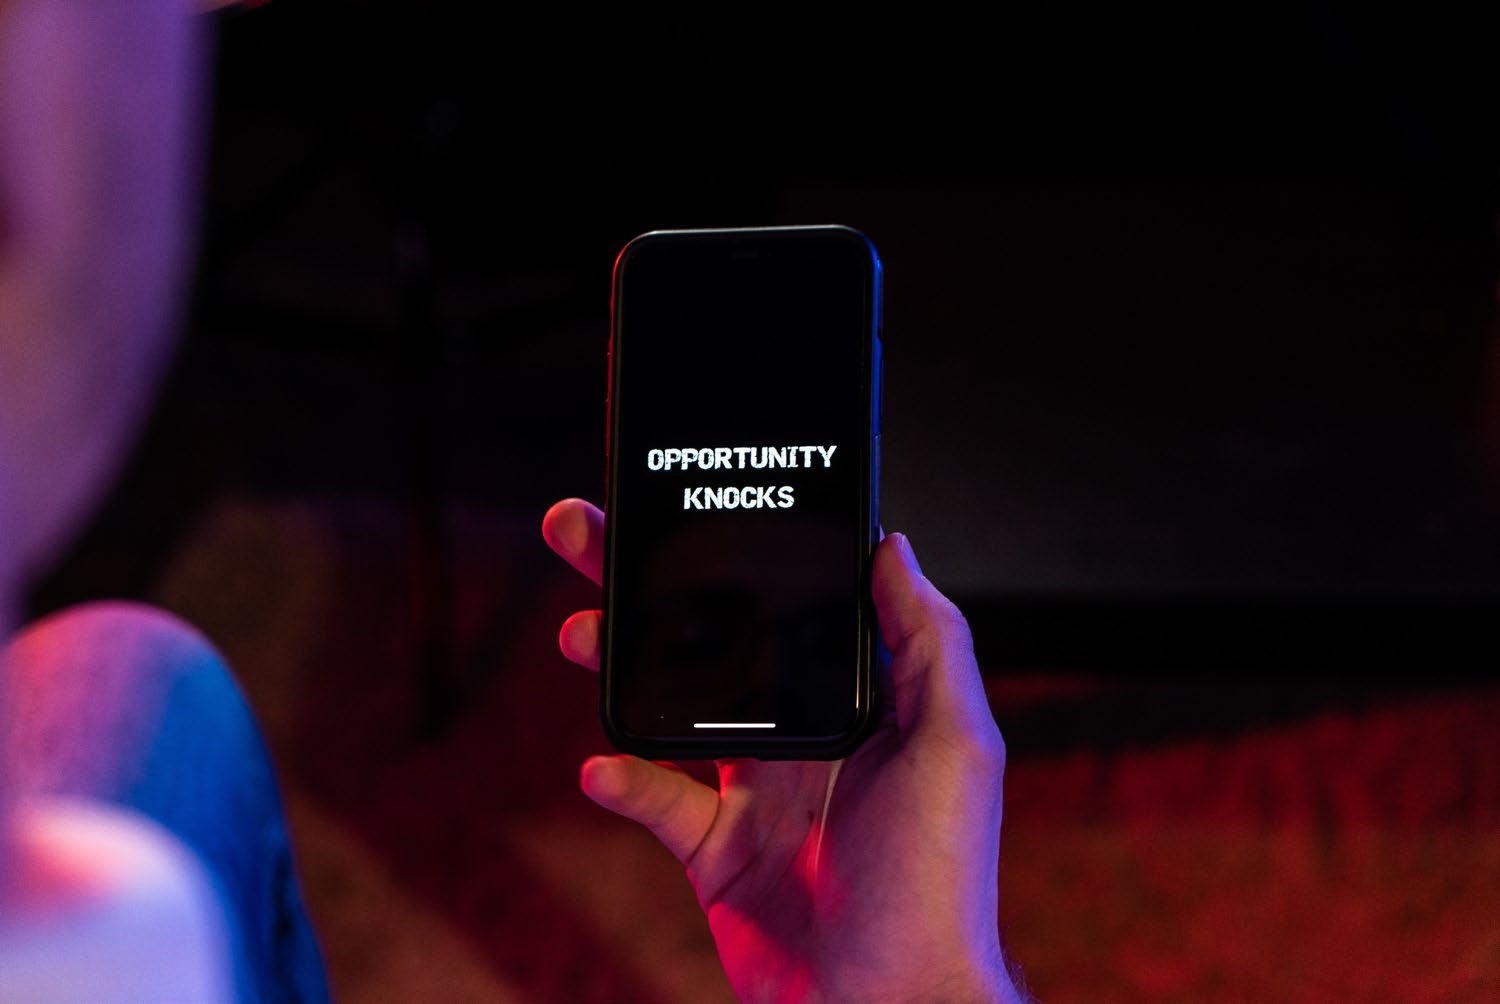 A phone which has the words opportunity knocks on its screen